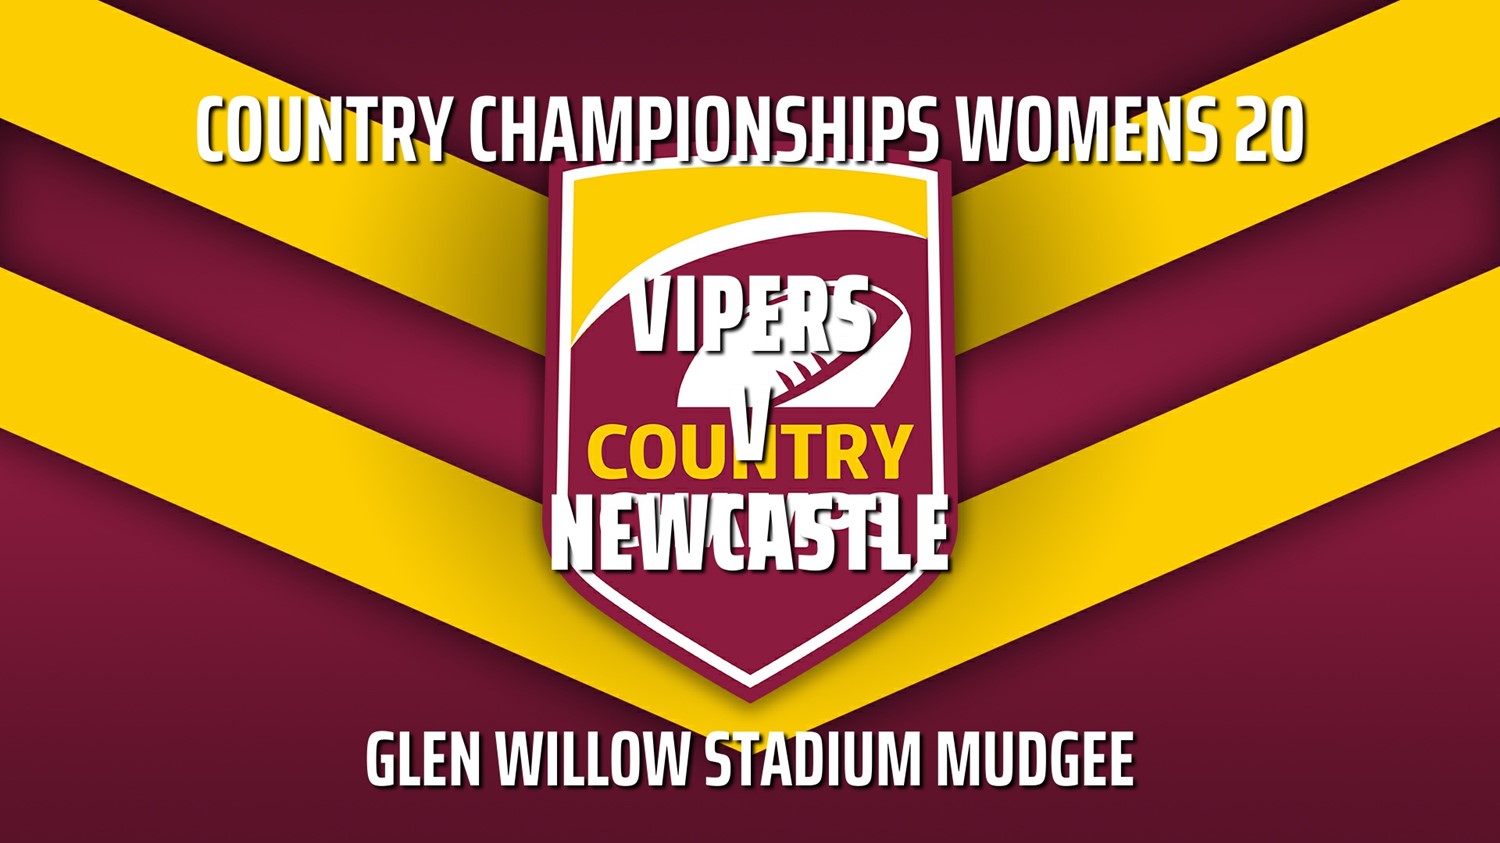 231015-Country Championships Womens 20 - Women's 20 - Wagga Wagga v Newcastle City Touch Minigame Slate Image